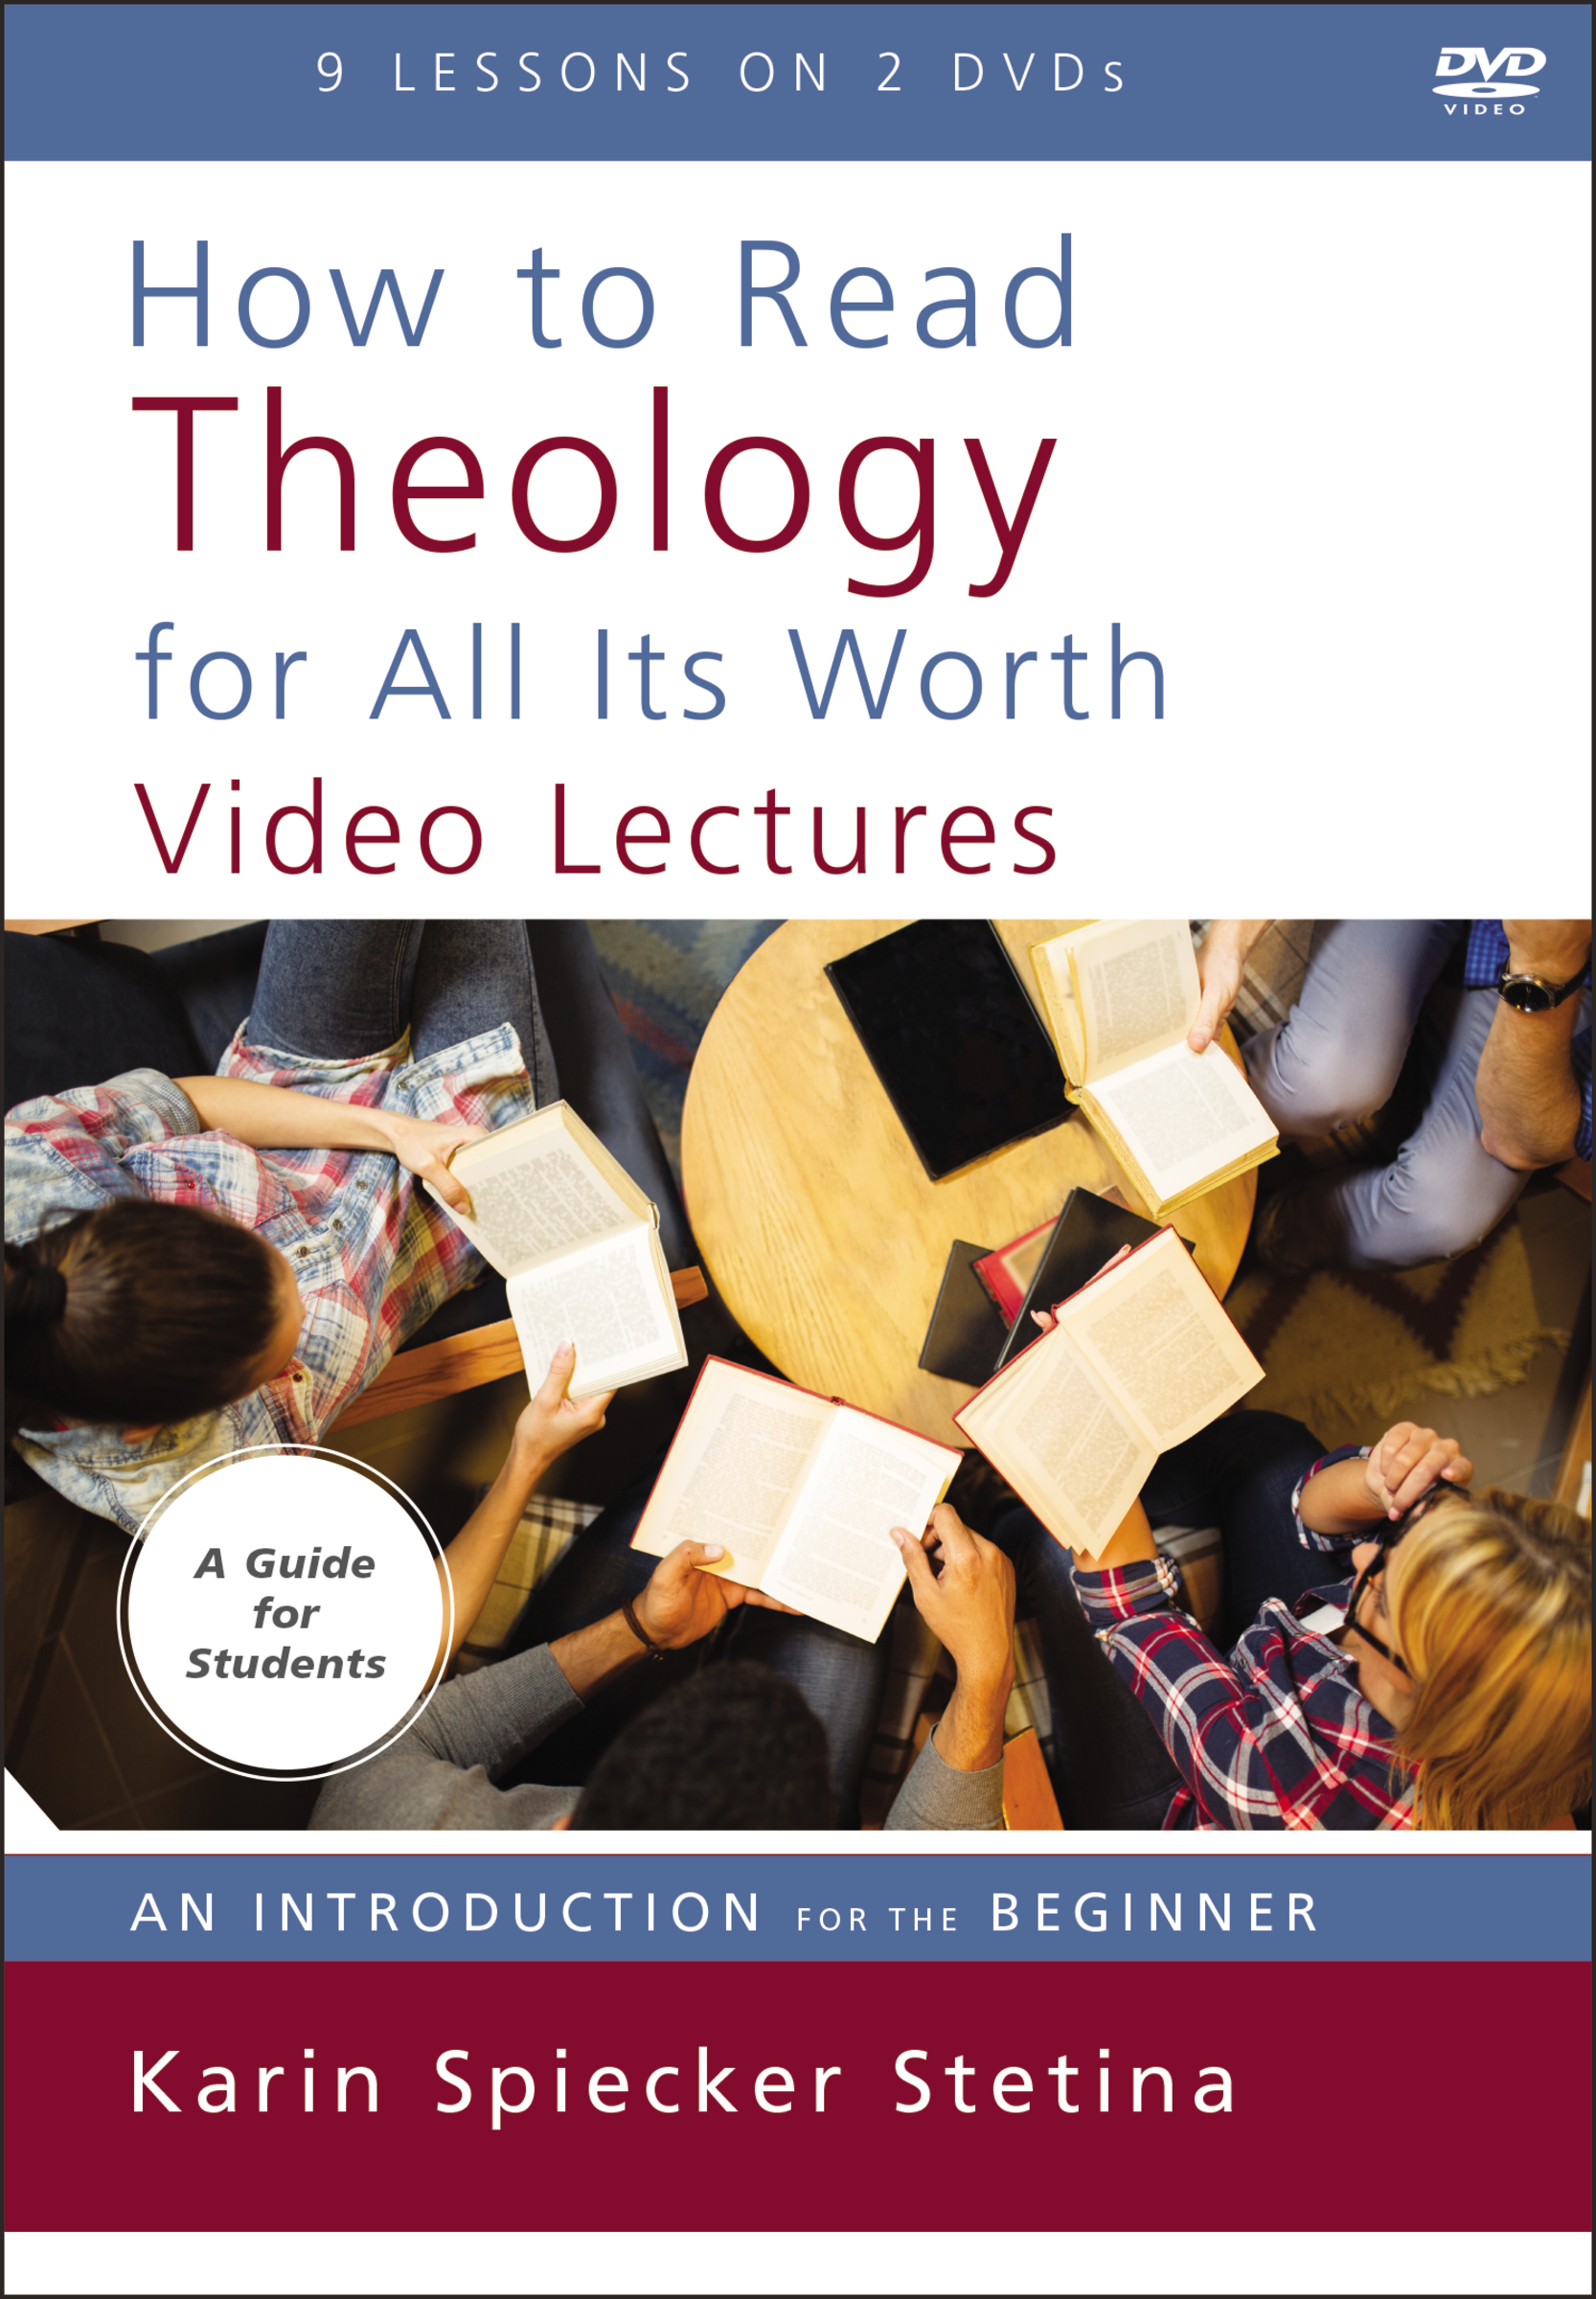 How to Read Theology for All Its Worth Video Lectures